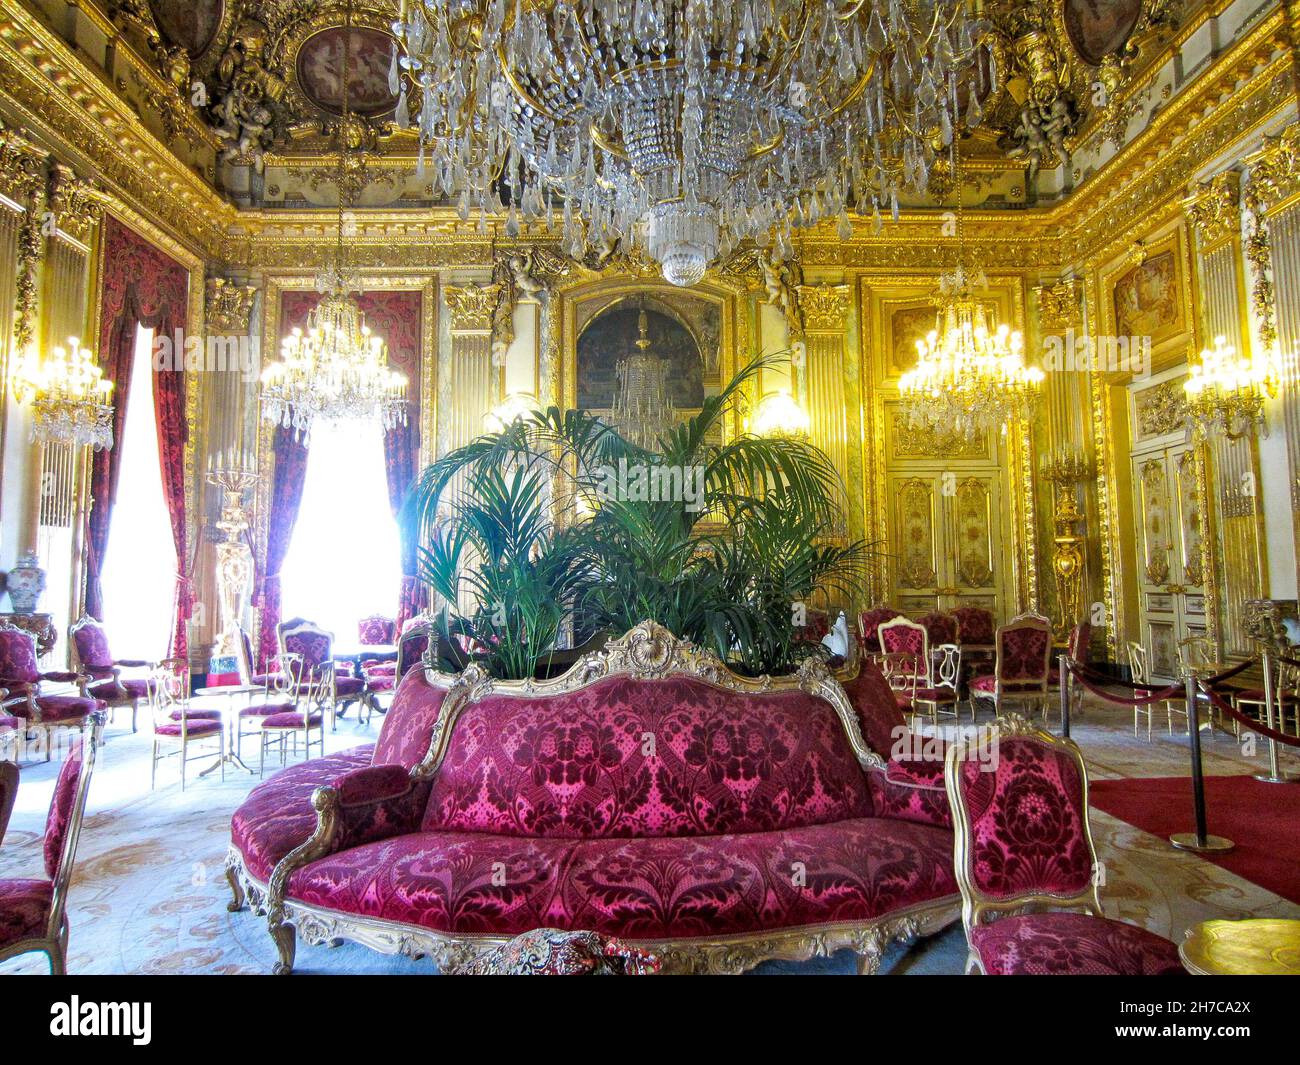 PARIS, FRANCE - Sep 12, 2021: A view of the Napoleonic Apartments in the red boudoir in the Louvre Museum, France Stock Photo